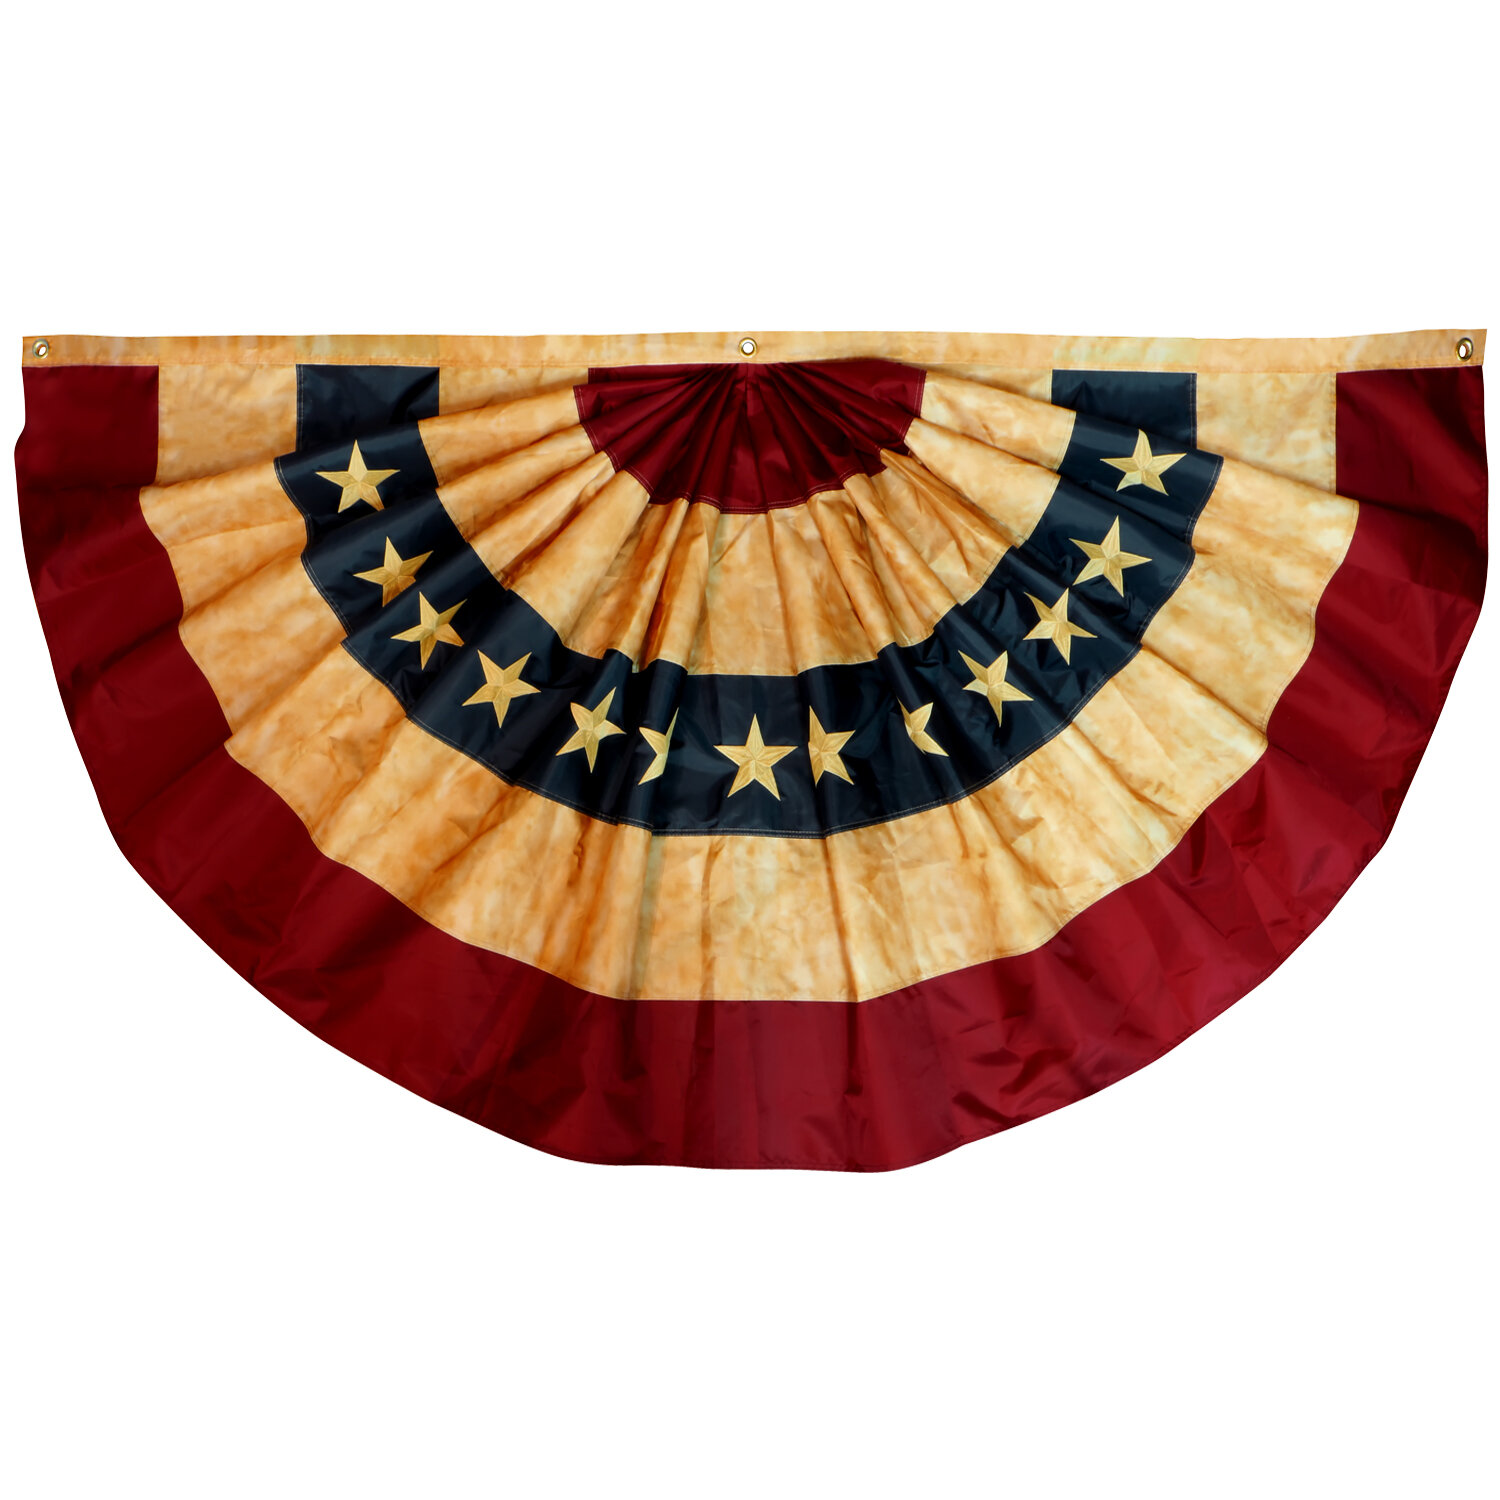 USA MADE 3x5 US NYLON FLAG EMBROIDERED&SEWN 2-SIDED UNITED STATES AMERICA Banner 